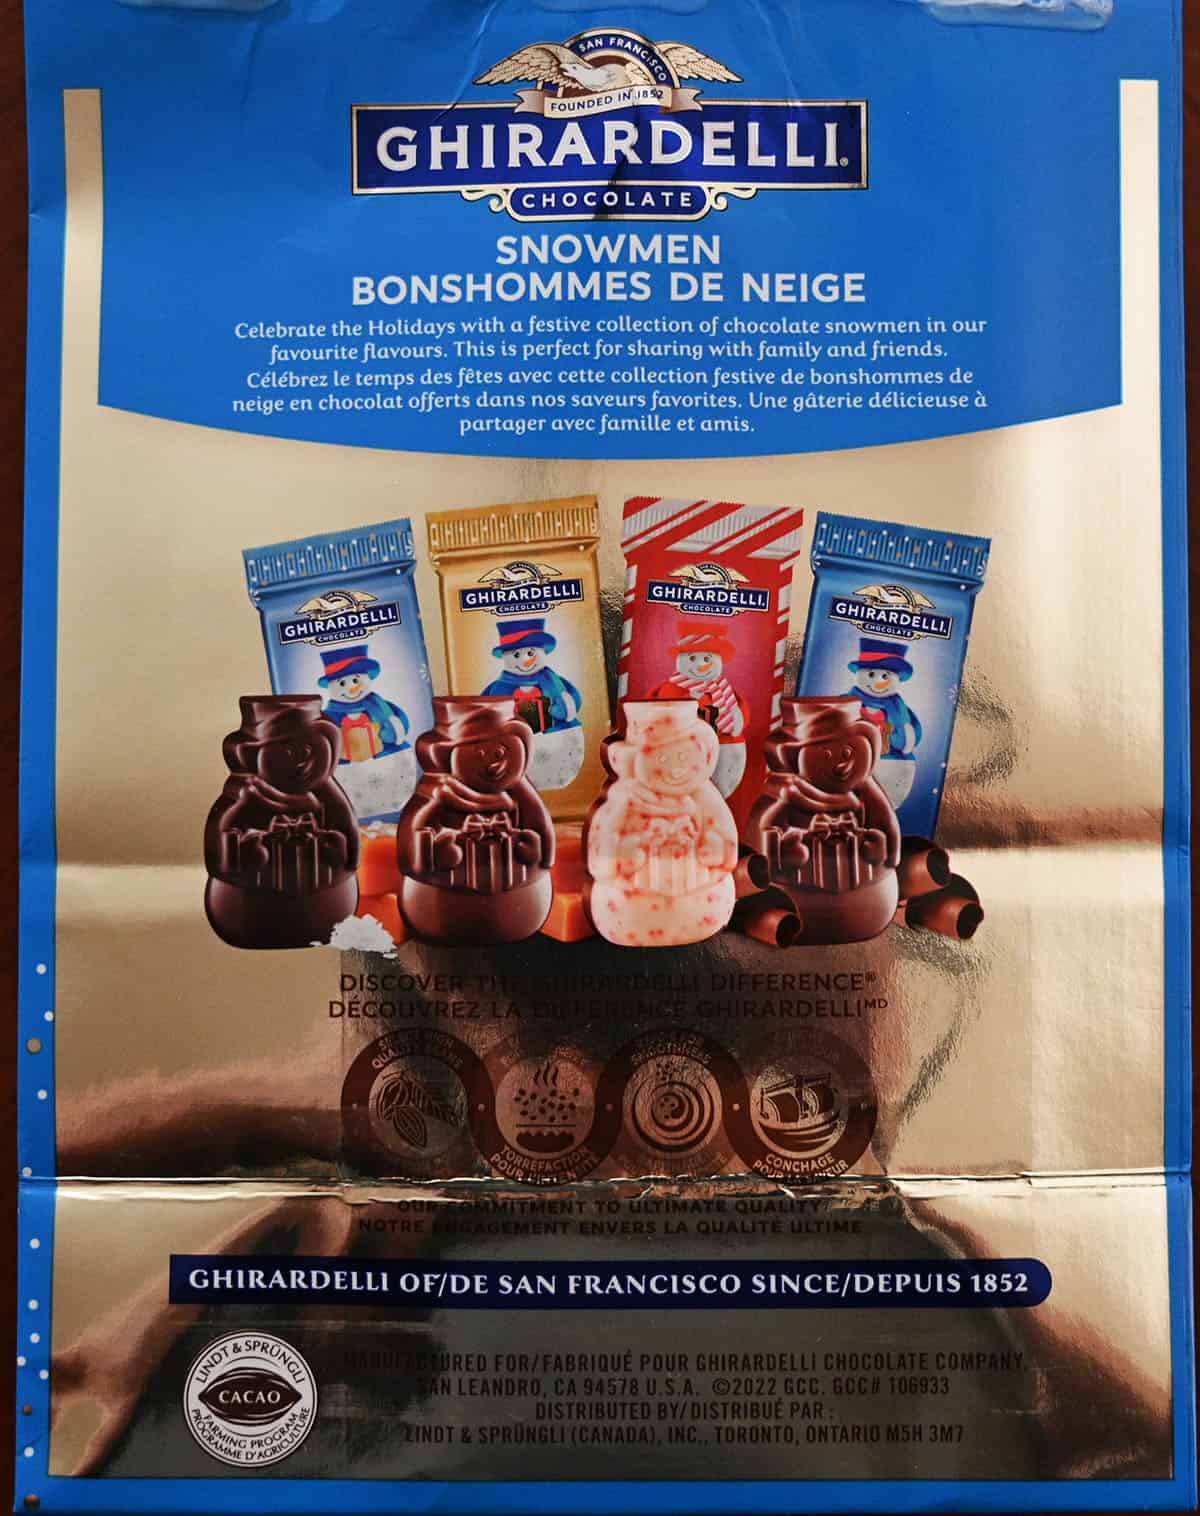 Closeup image of the back of the bag of chocolate snowmen showing the Ghirardelli product description.